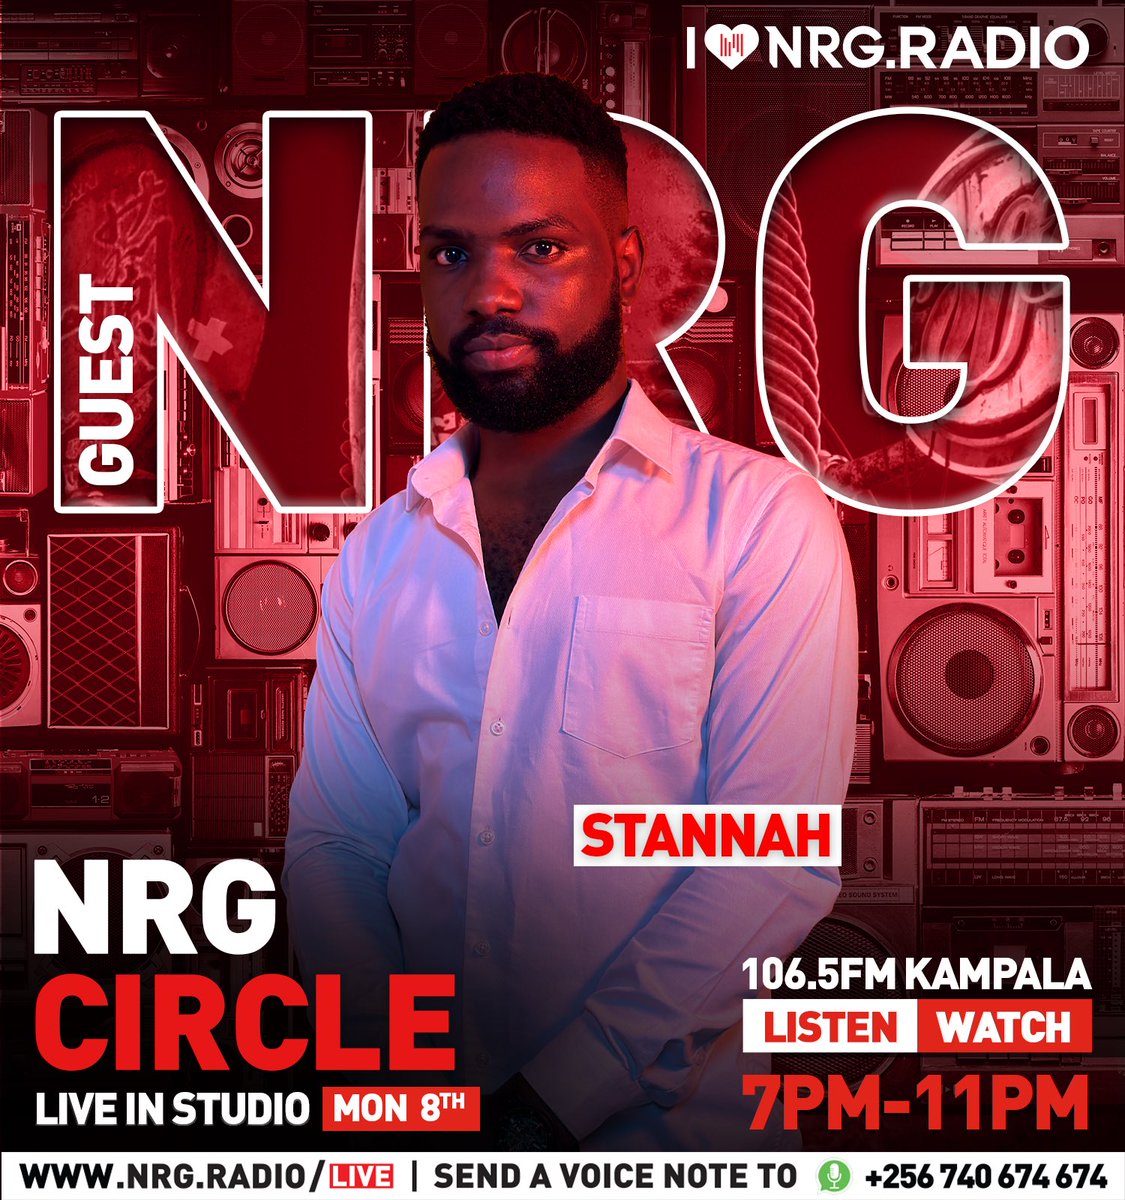 It’s new music Monday!! Going live on air from 7pm - 11pm with @zamn_zion & @forever_etania 🥳🥳 Tune in to 106.5 @NRGRadioUganda and catchup a vibe 🔥🔥 Special guest tonight is Stannah #NRGCircleUG #NRGRadioUG